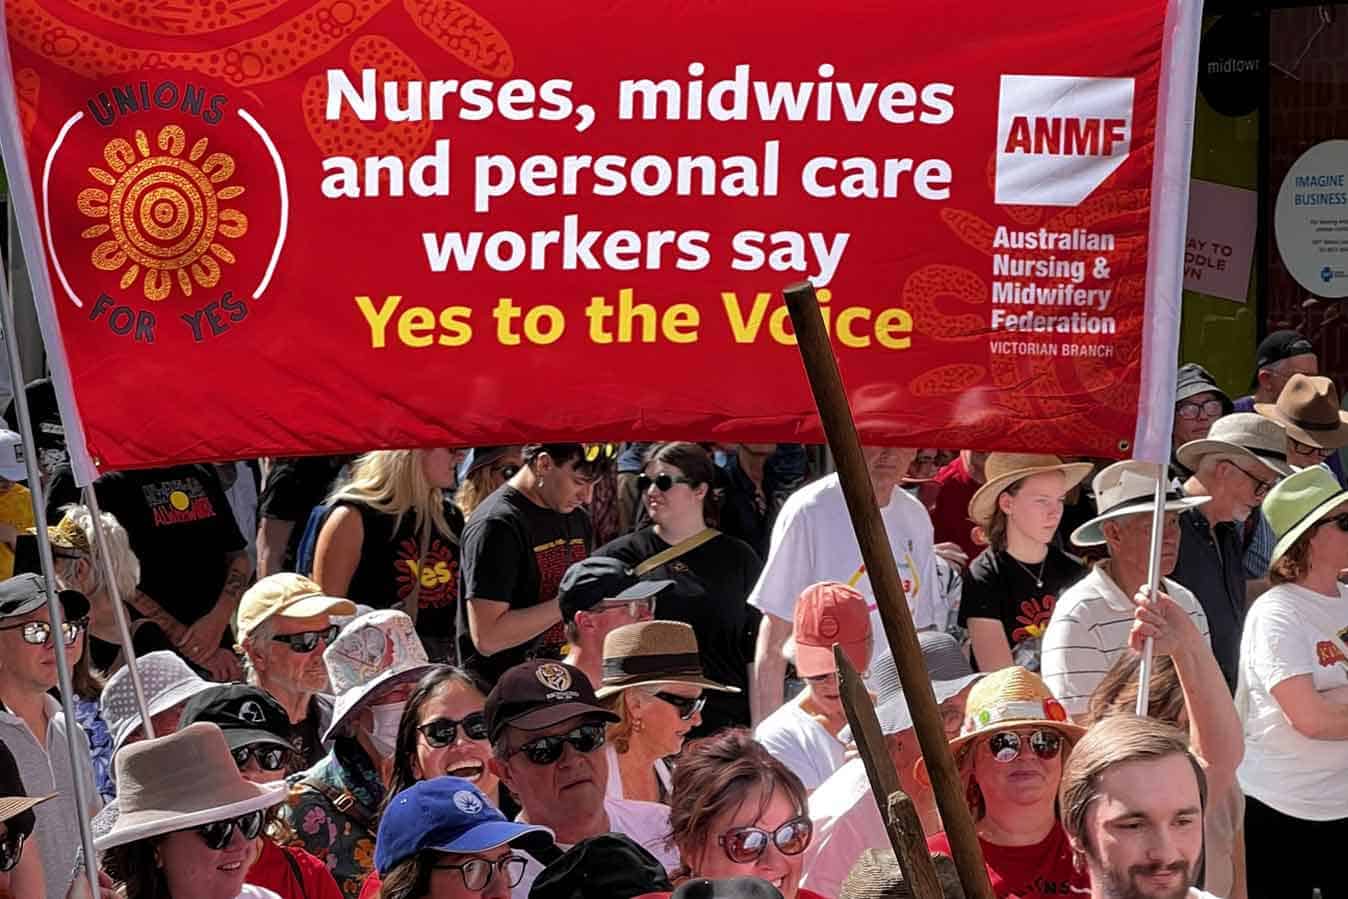 Nurses, midwives and personal care workers say Yes to the Voice